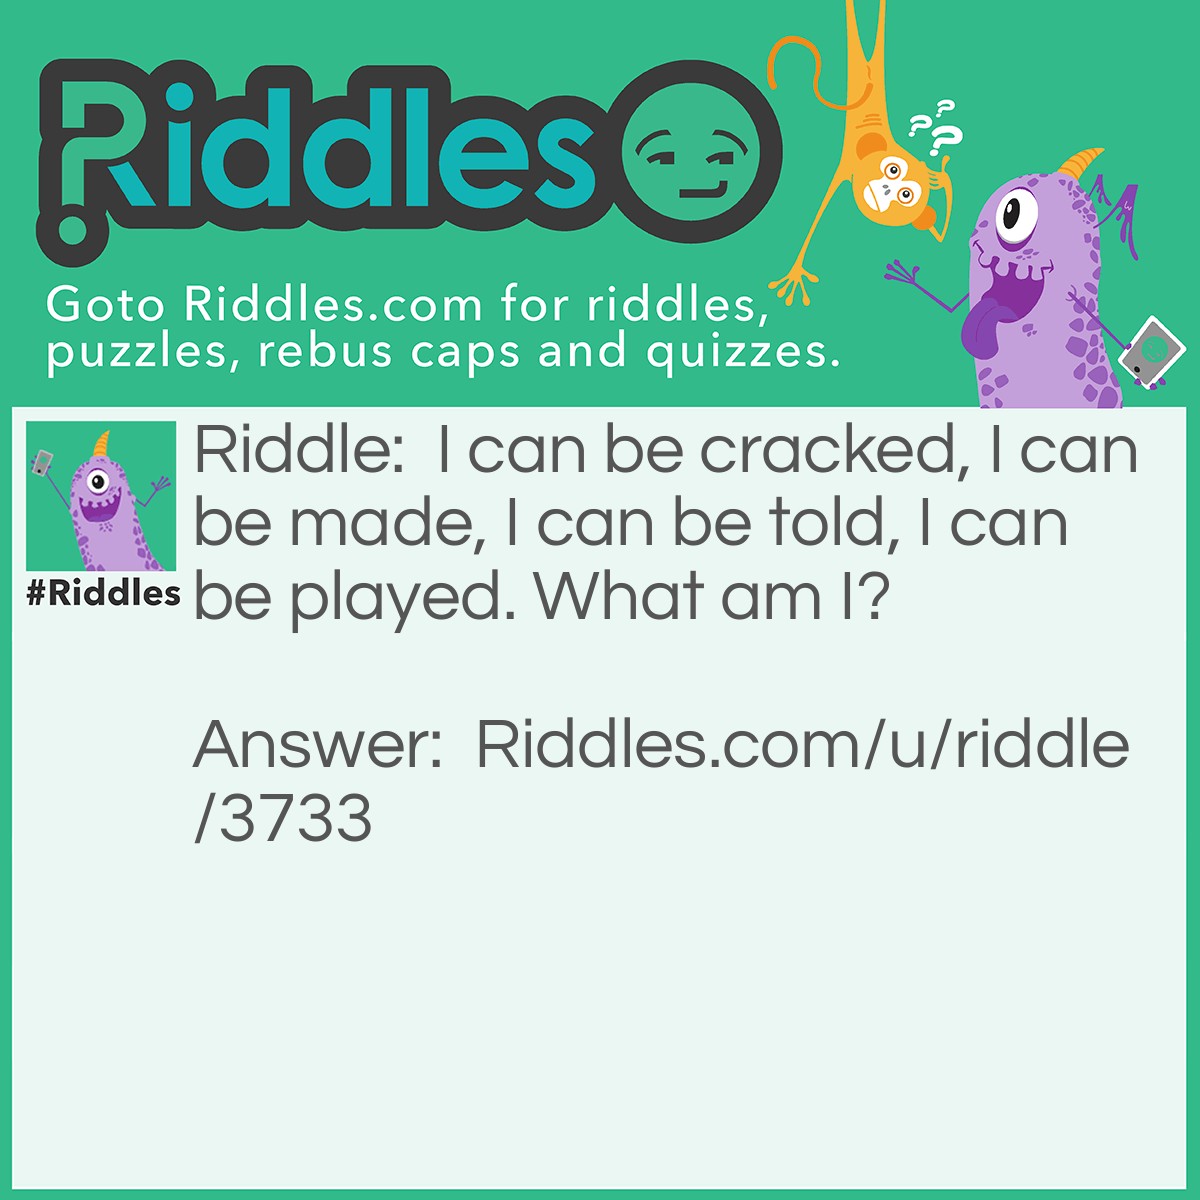 Riddle: I can be cracked, I can be made, I can be told, I can be played. What am I? Answer: Jokes/riddles.